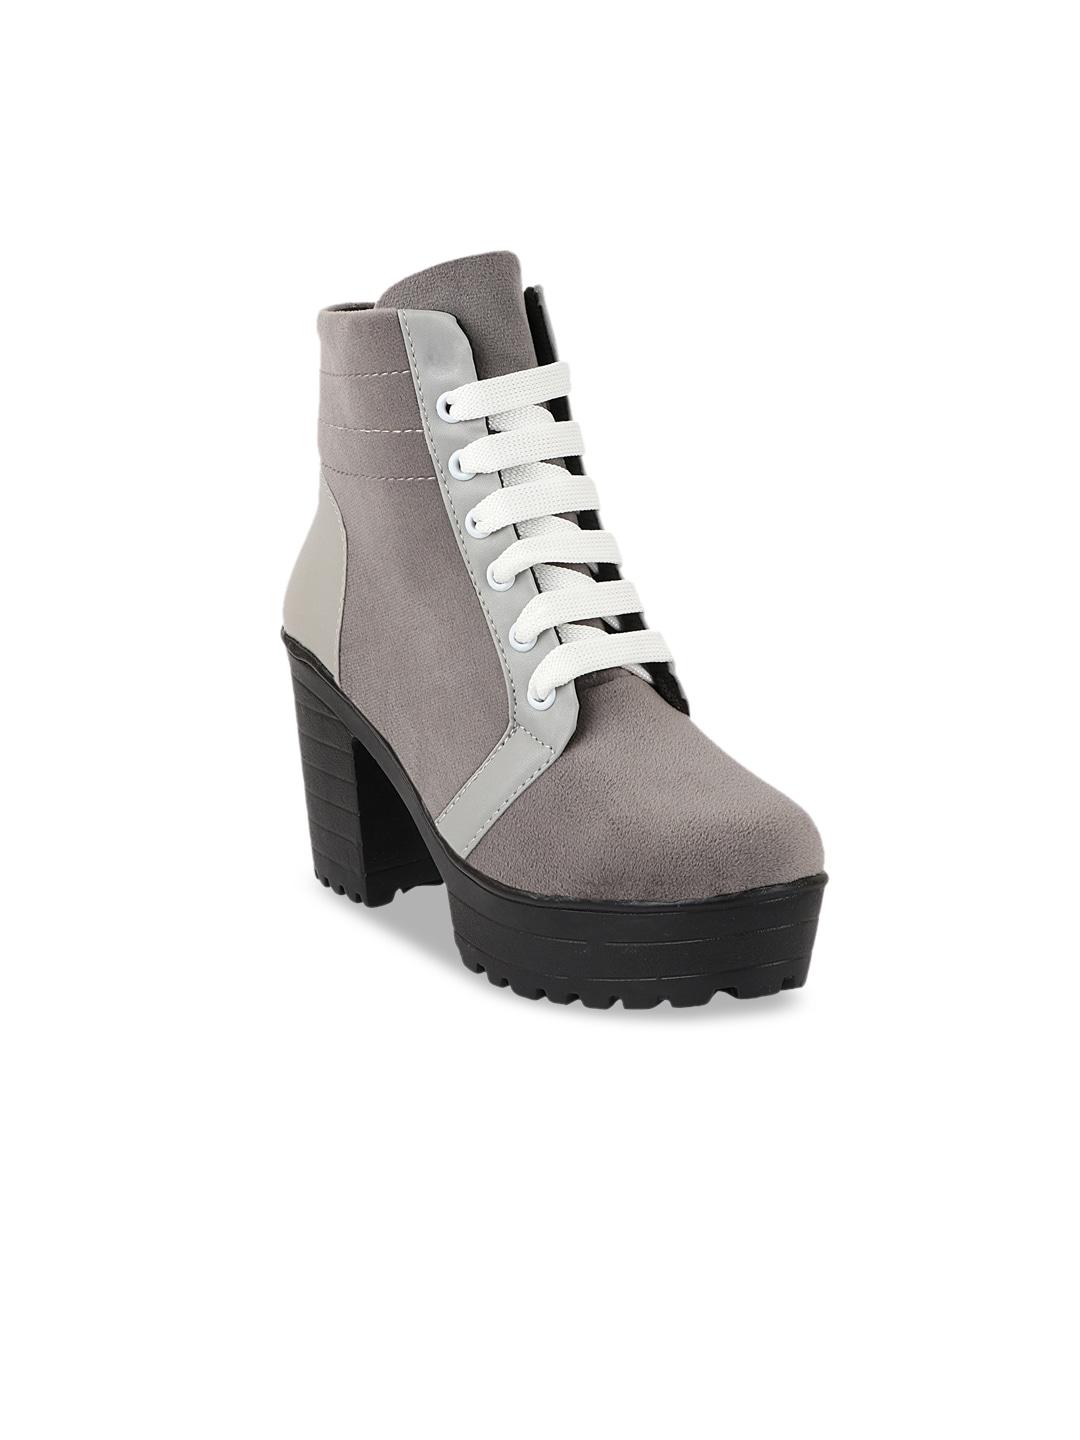 shoetopia-grey-colourblocked-suede-block-heeled-boots-with-laser-cuts